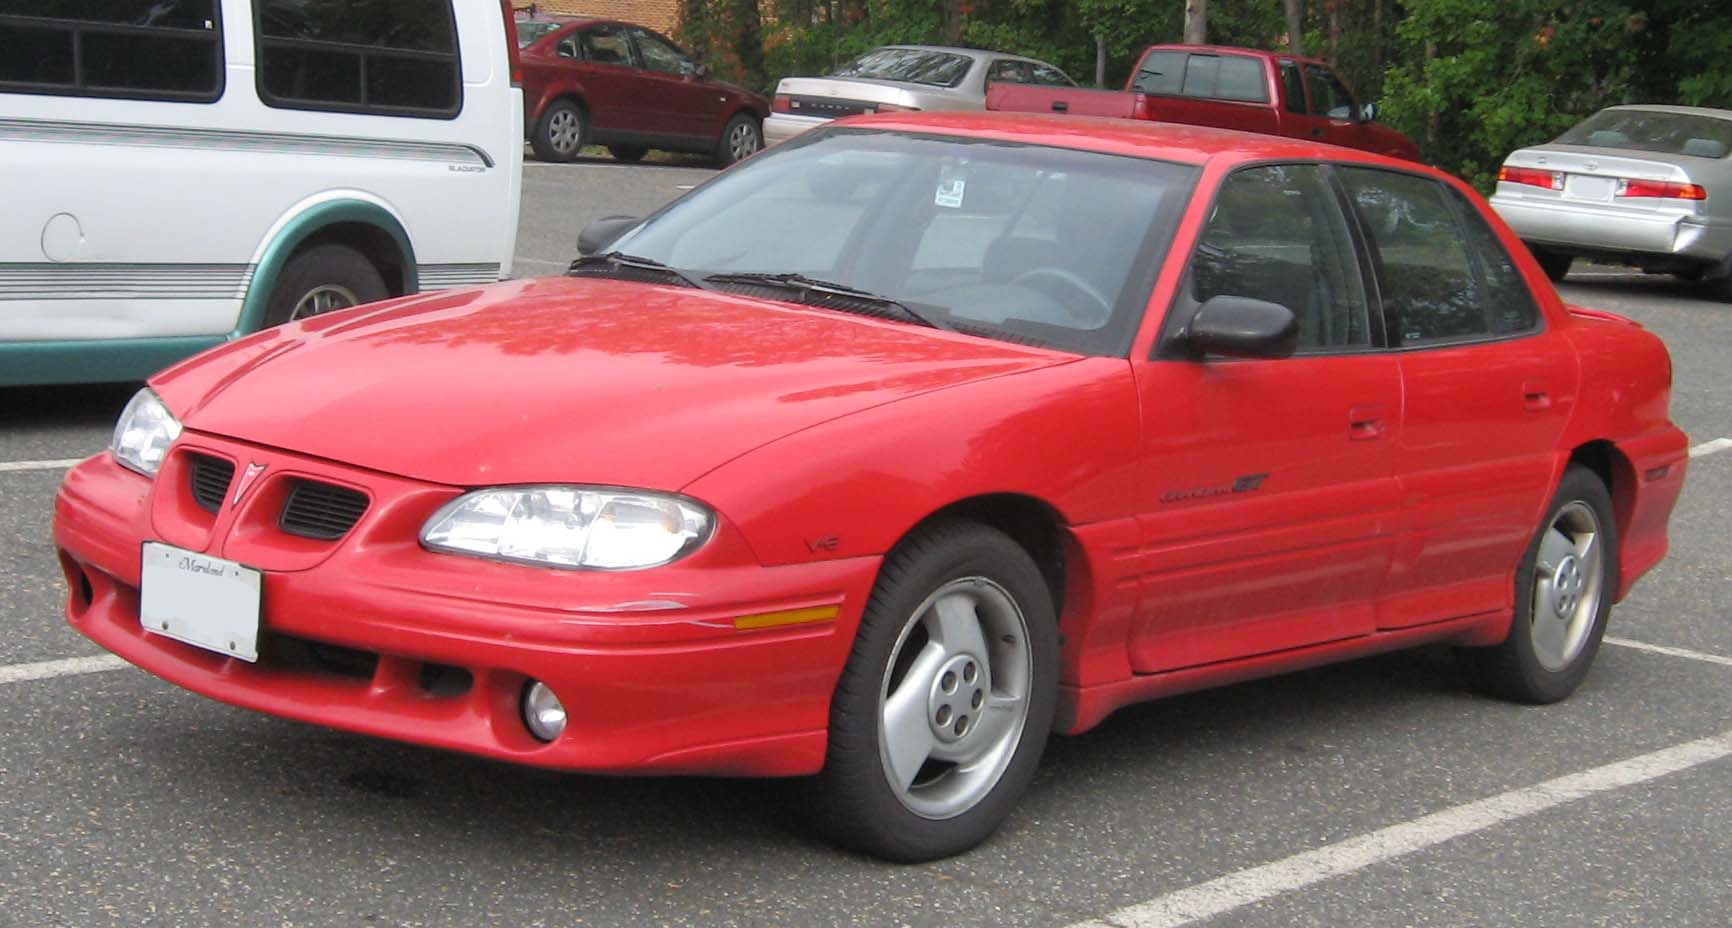 crappy cars from the 90s